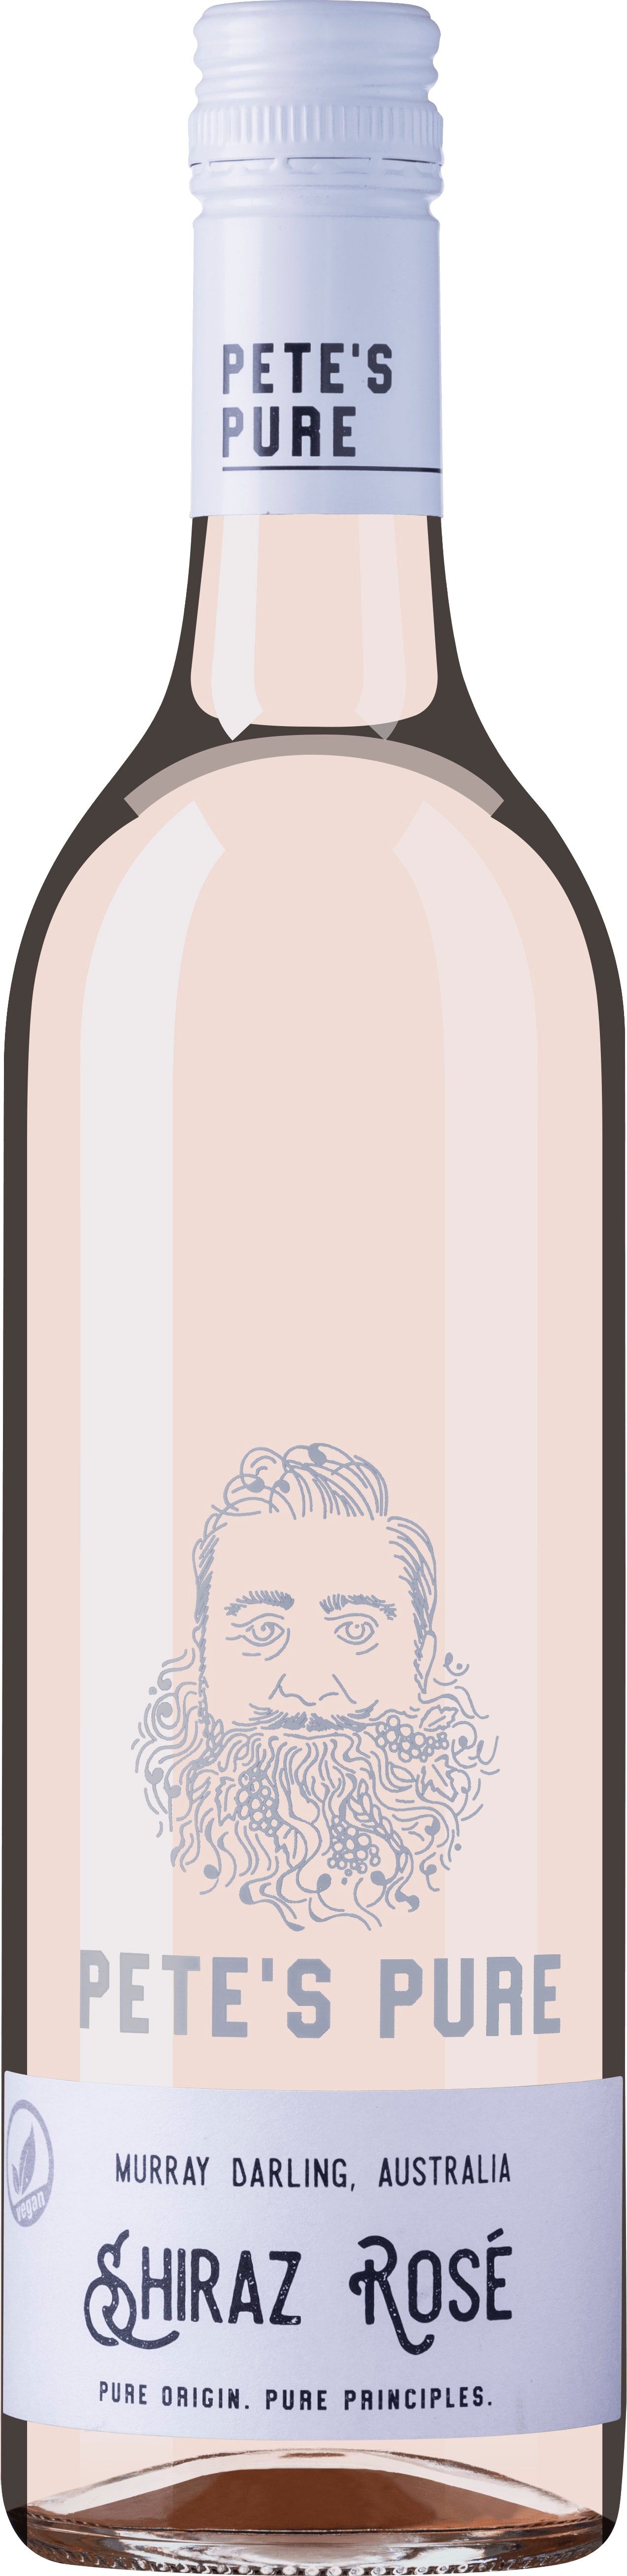 Pete's Pure Wine Shiraz Rose 2022 75cl - Buy Pete's Pure Wine Wines from GREAT WINES DIRECT wine shop